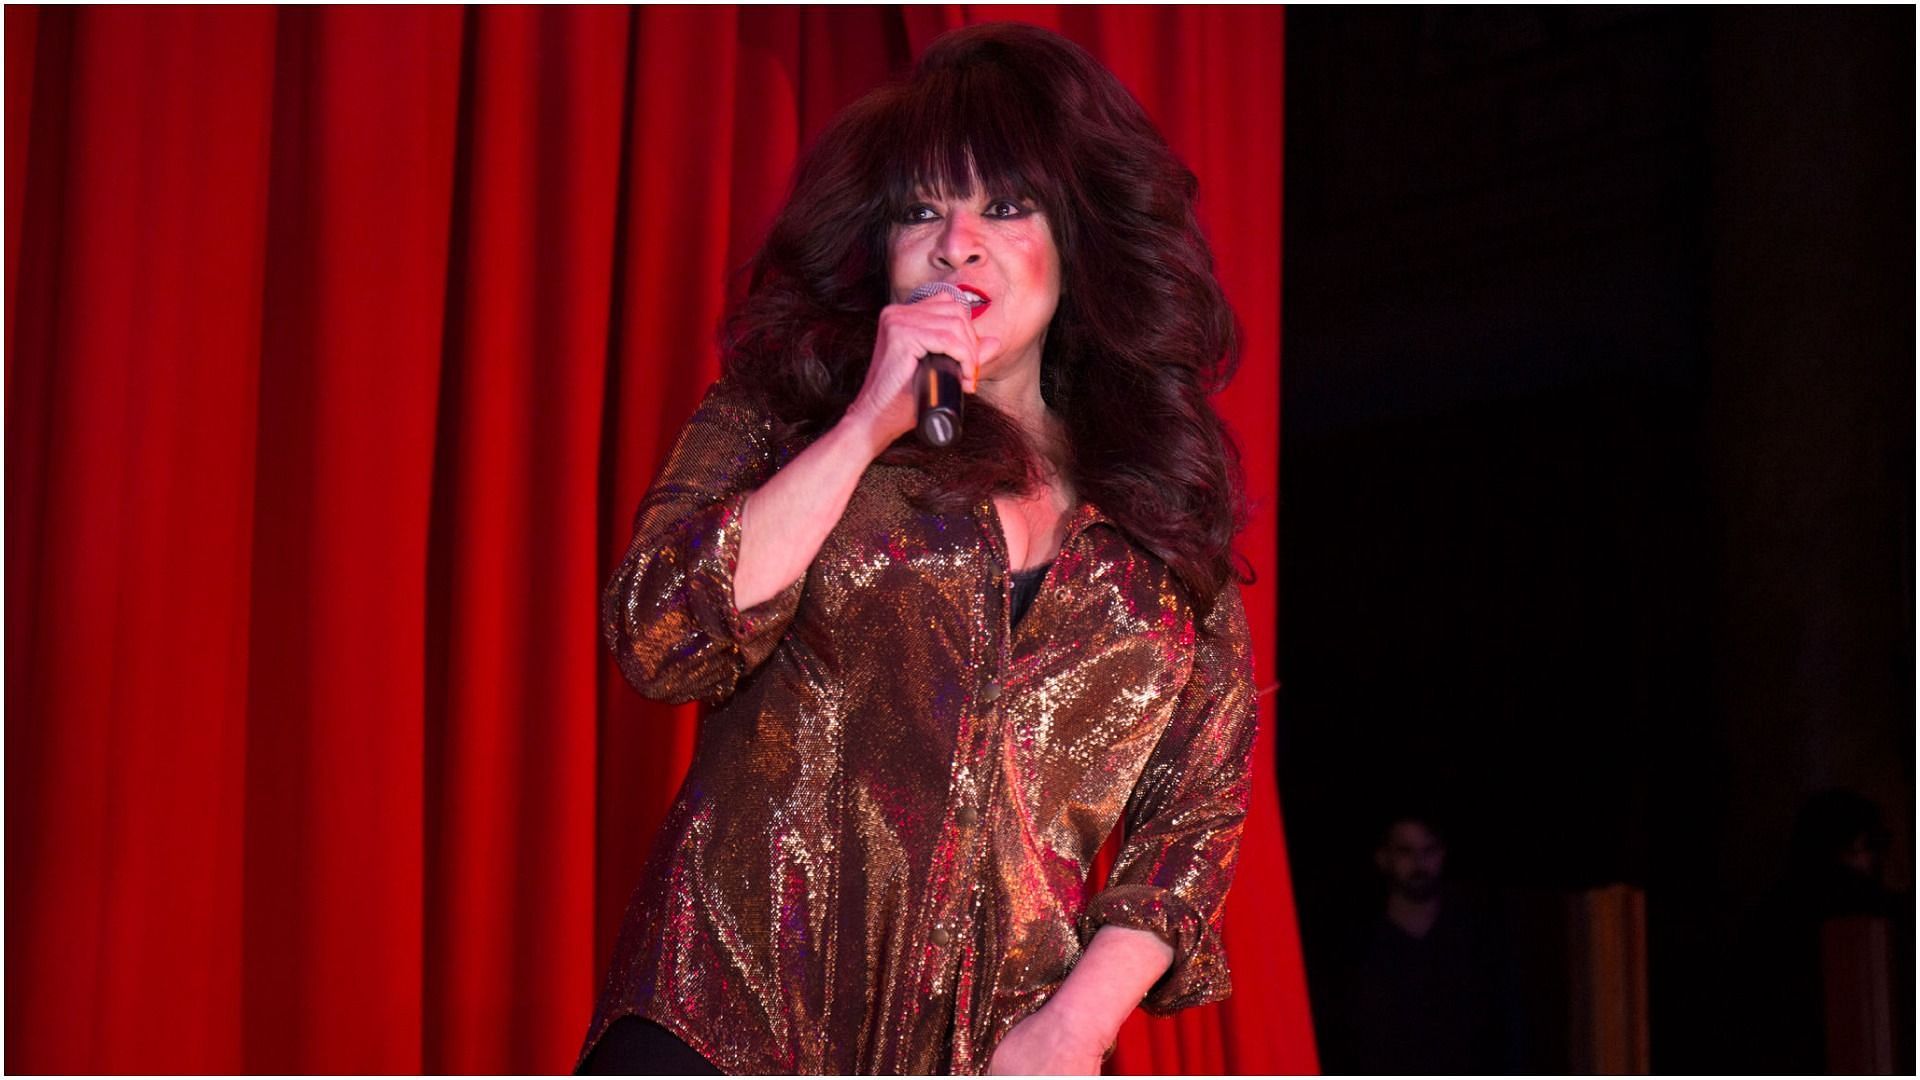 Ronnie Spector performs onstage during the Alcone Company 65th Anniversary Gala (Image via Santiago Felipe/Getty Images)